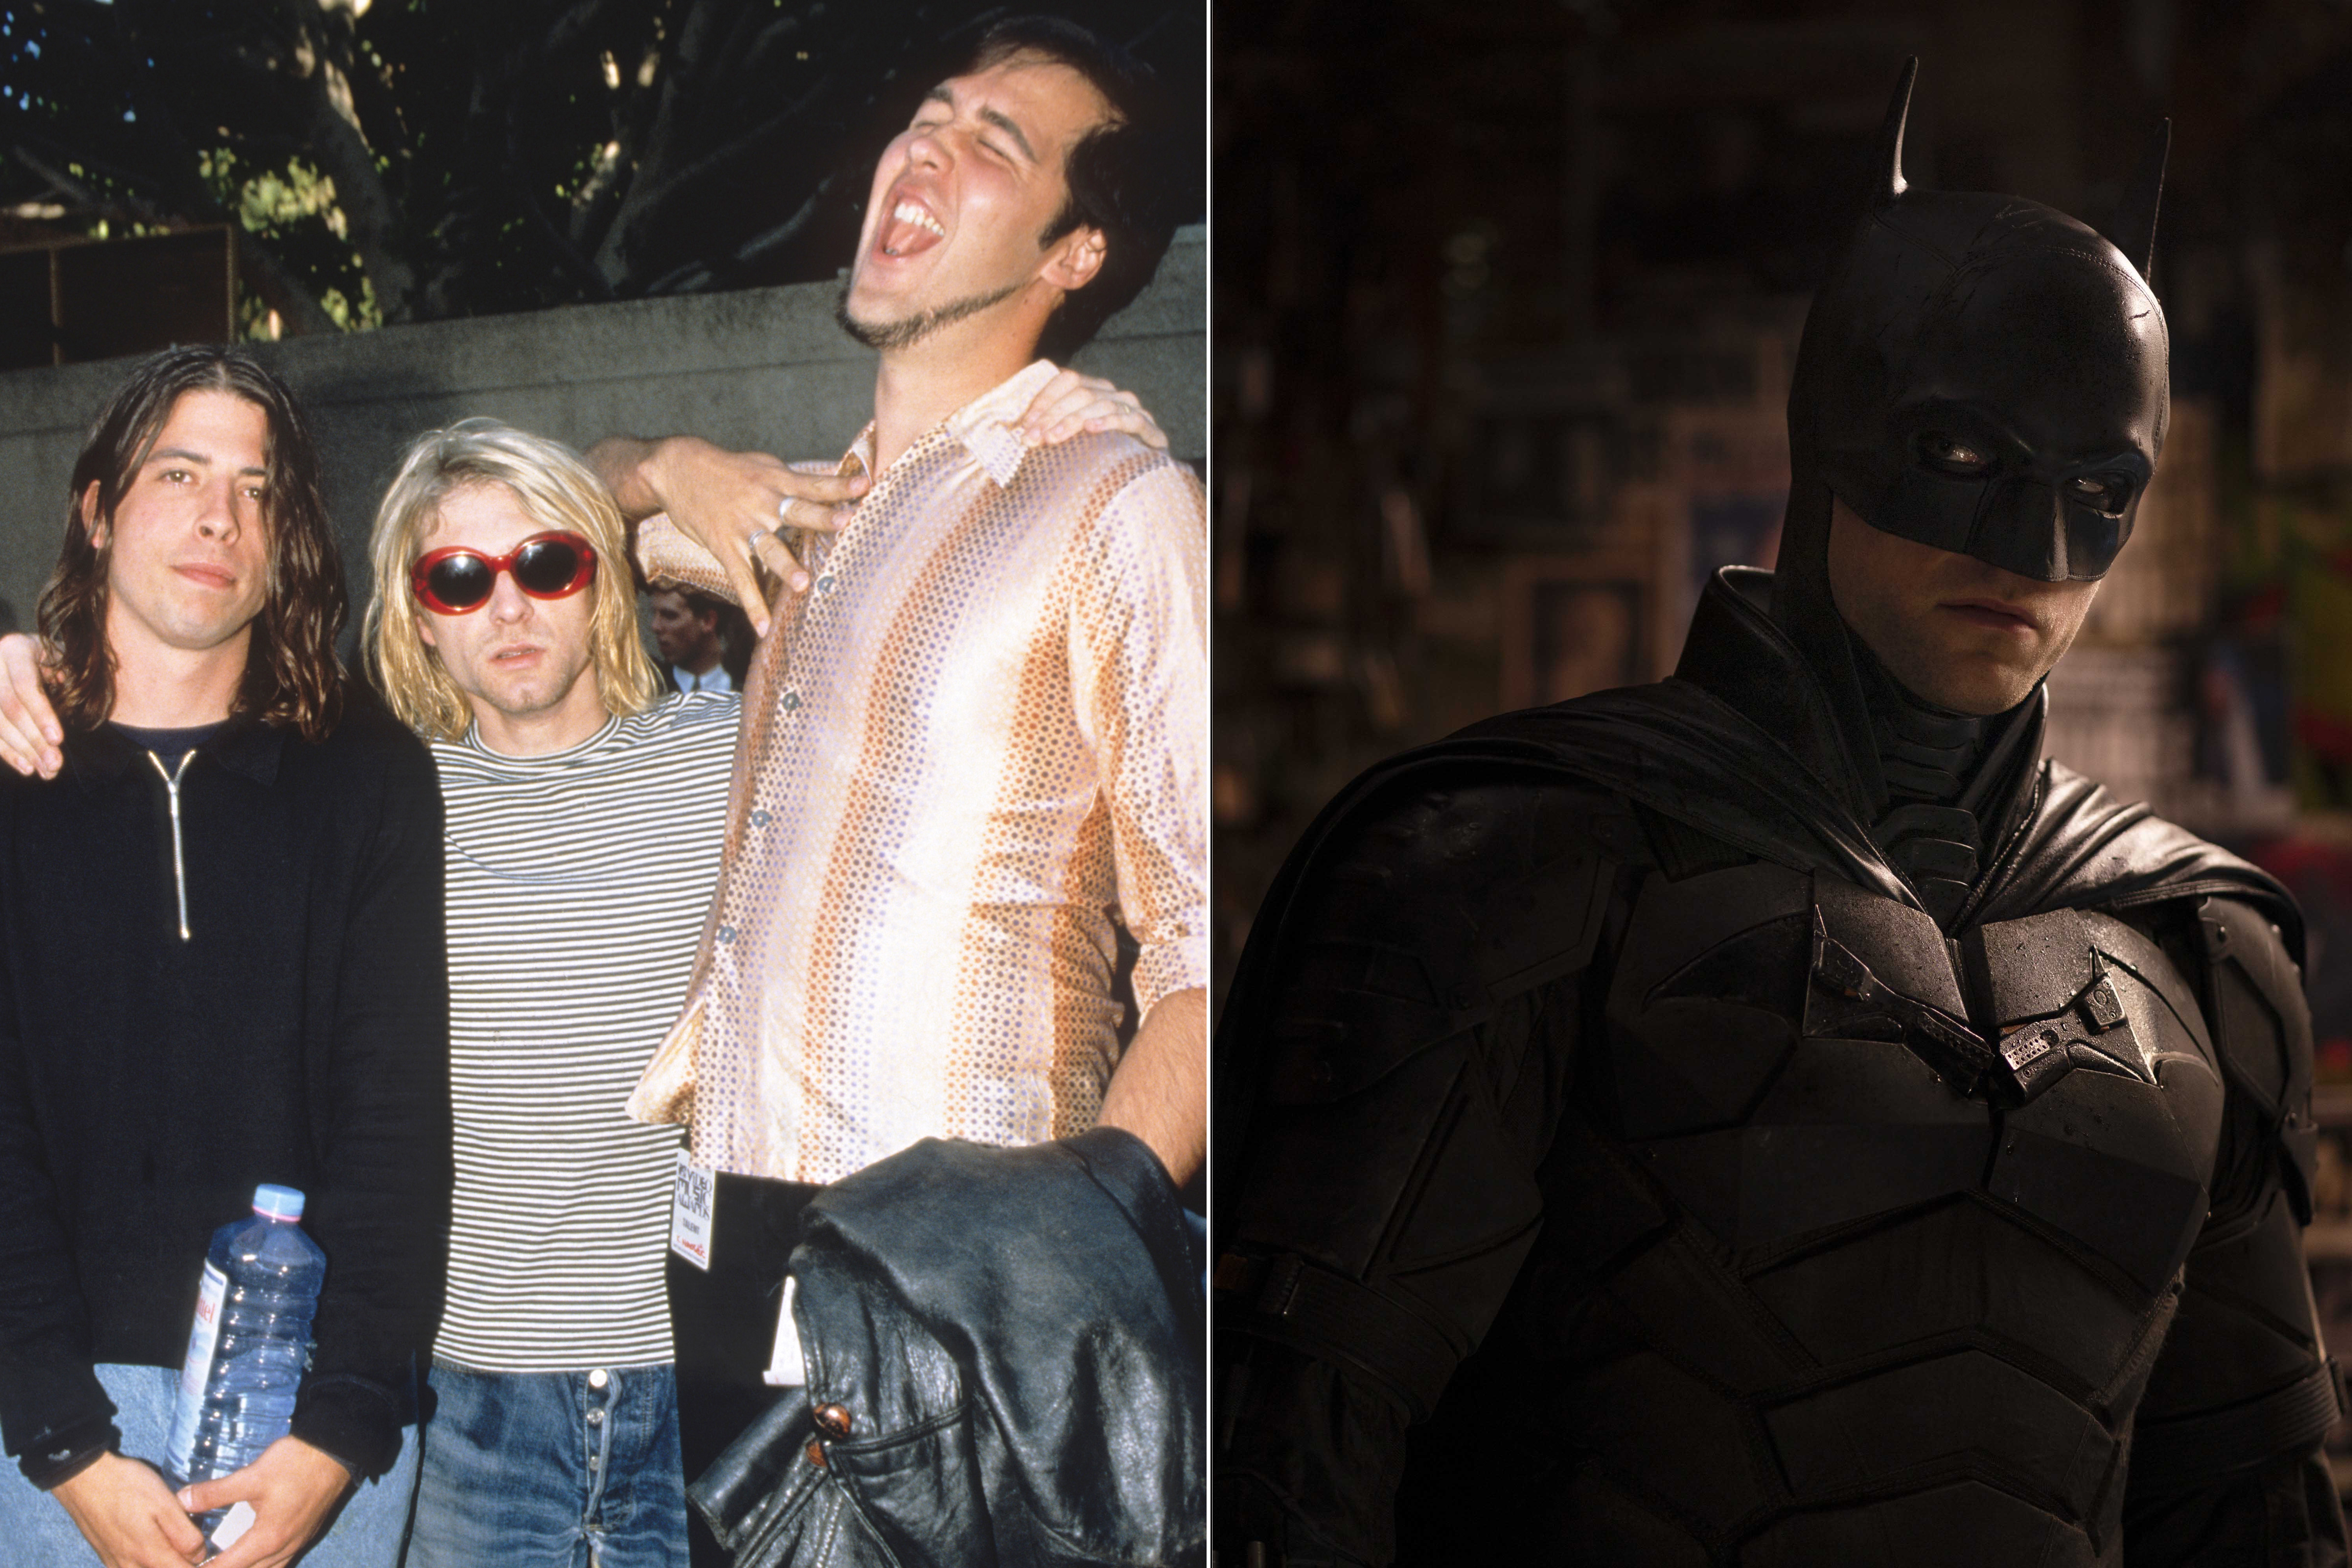 Nirvana song charts for the first time 31 years after its release thanks to  'The Batman'